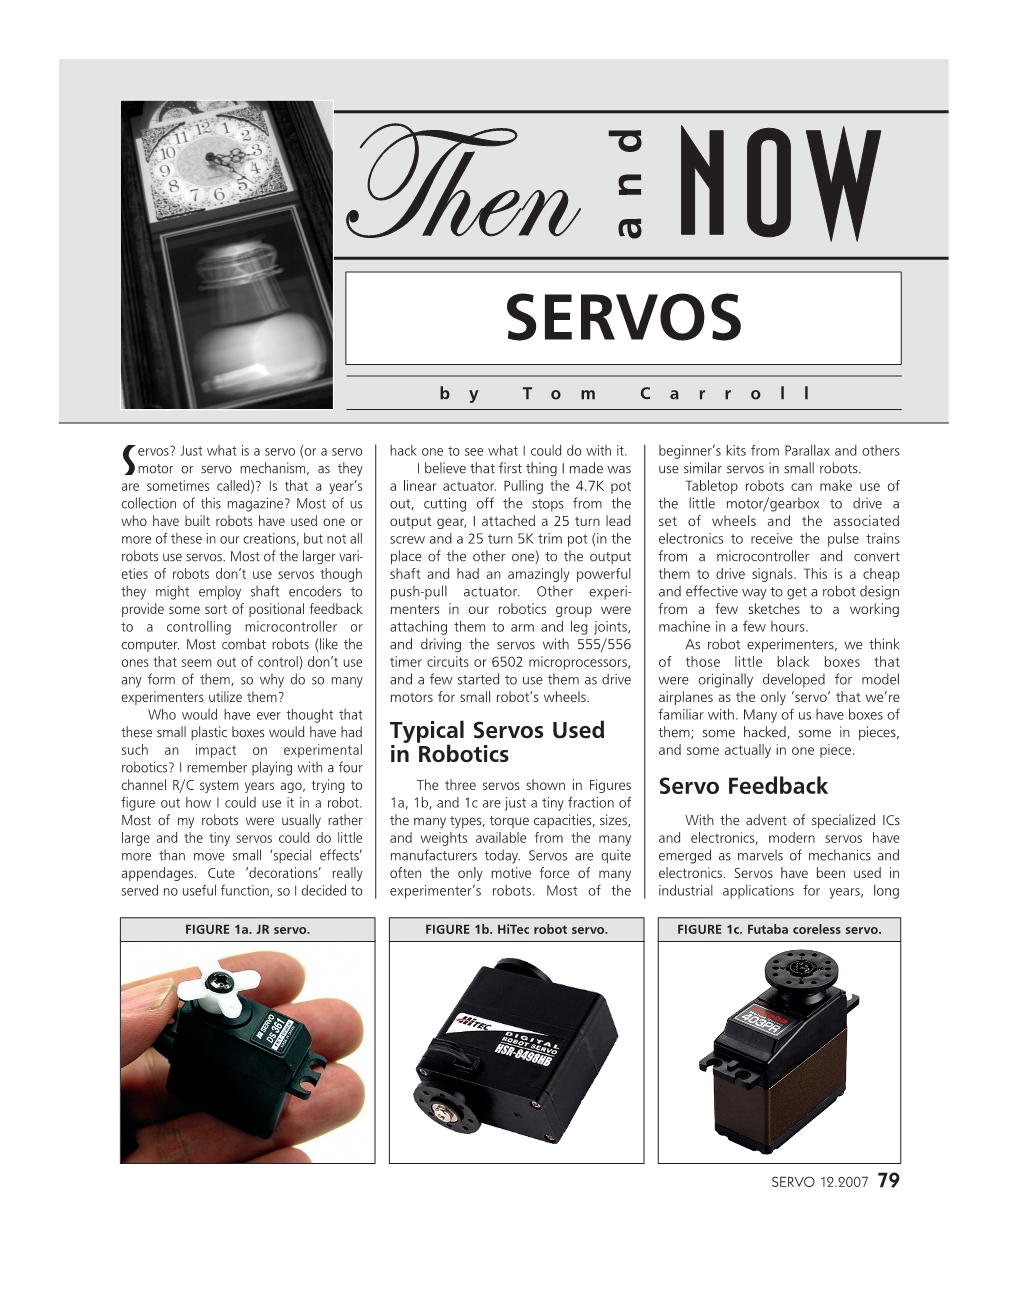 Then and Now: Servos